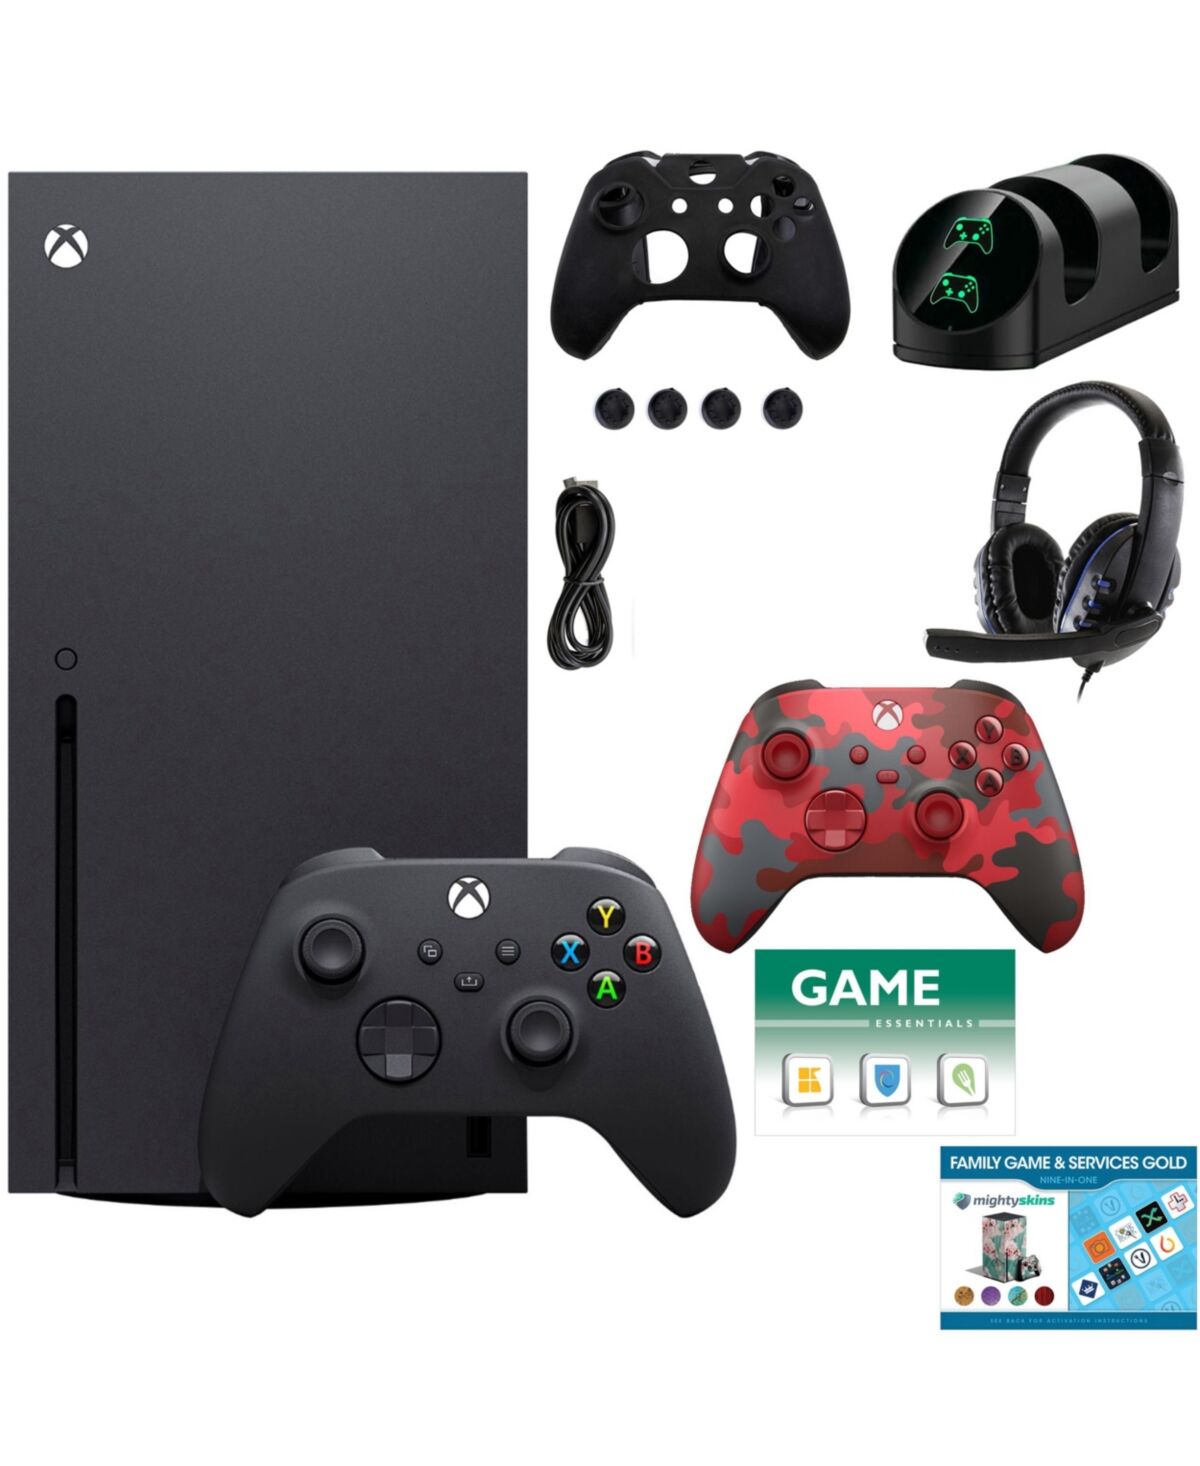 Xbox Series X Console w/ Extra Controller, Kit & 2 Vouchers - Black